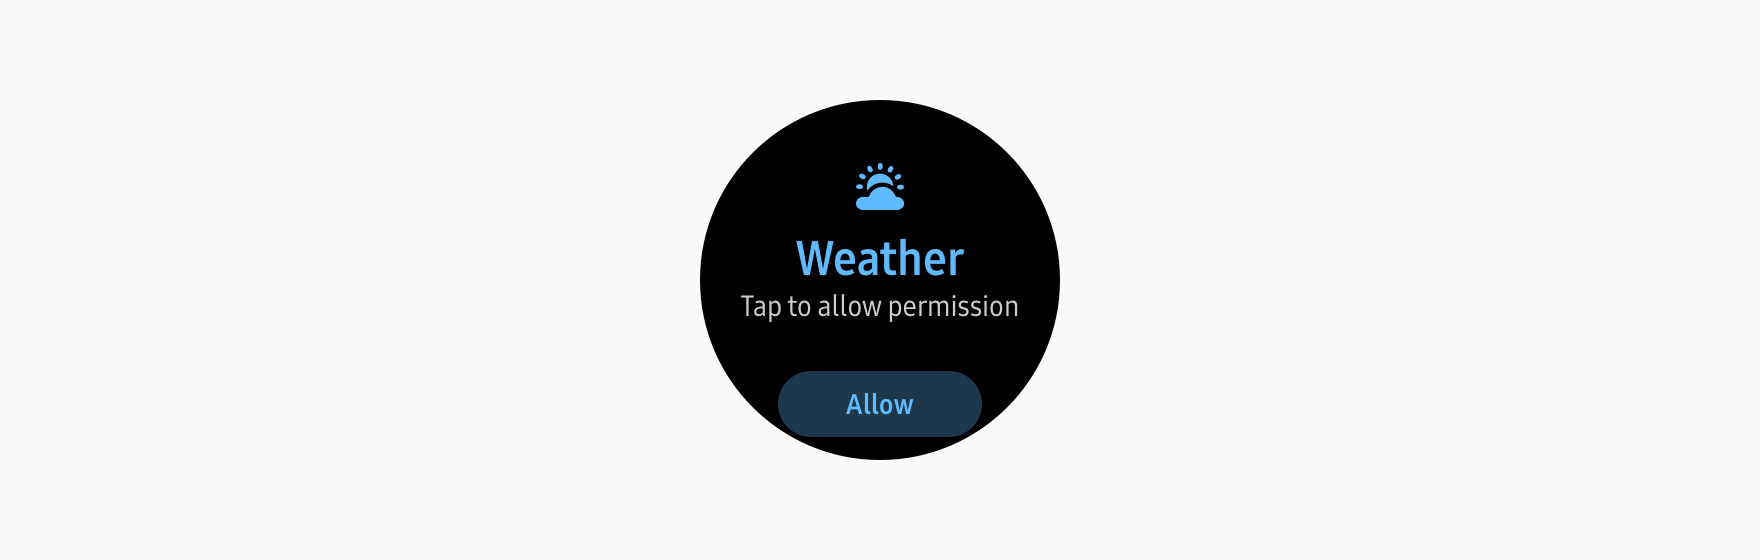 User can tap to move to Permission pop-up